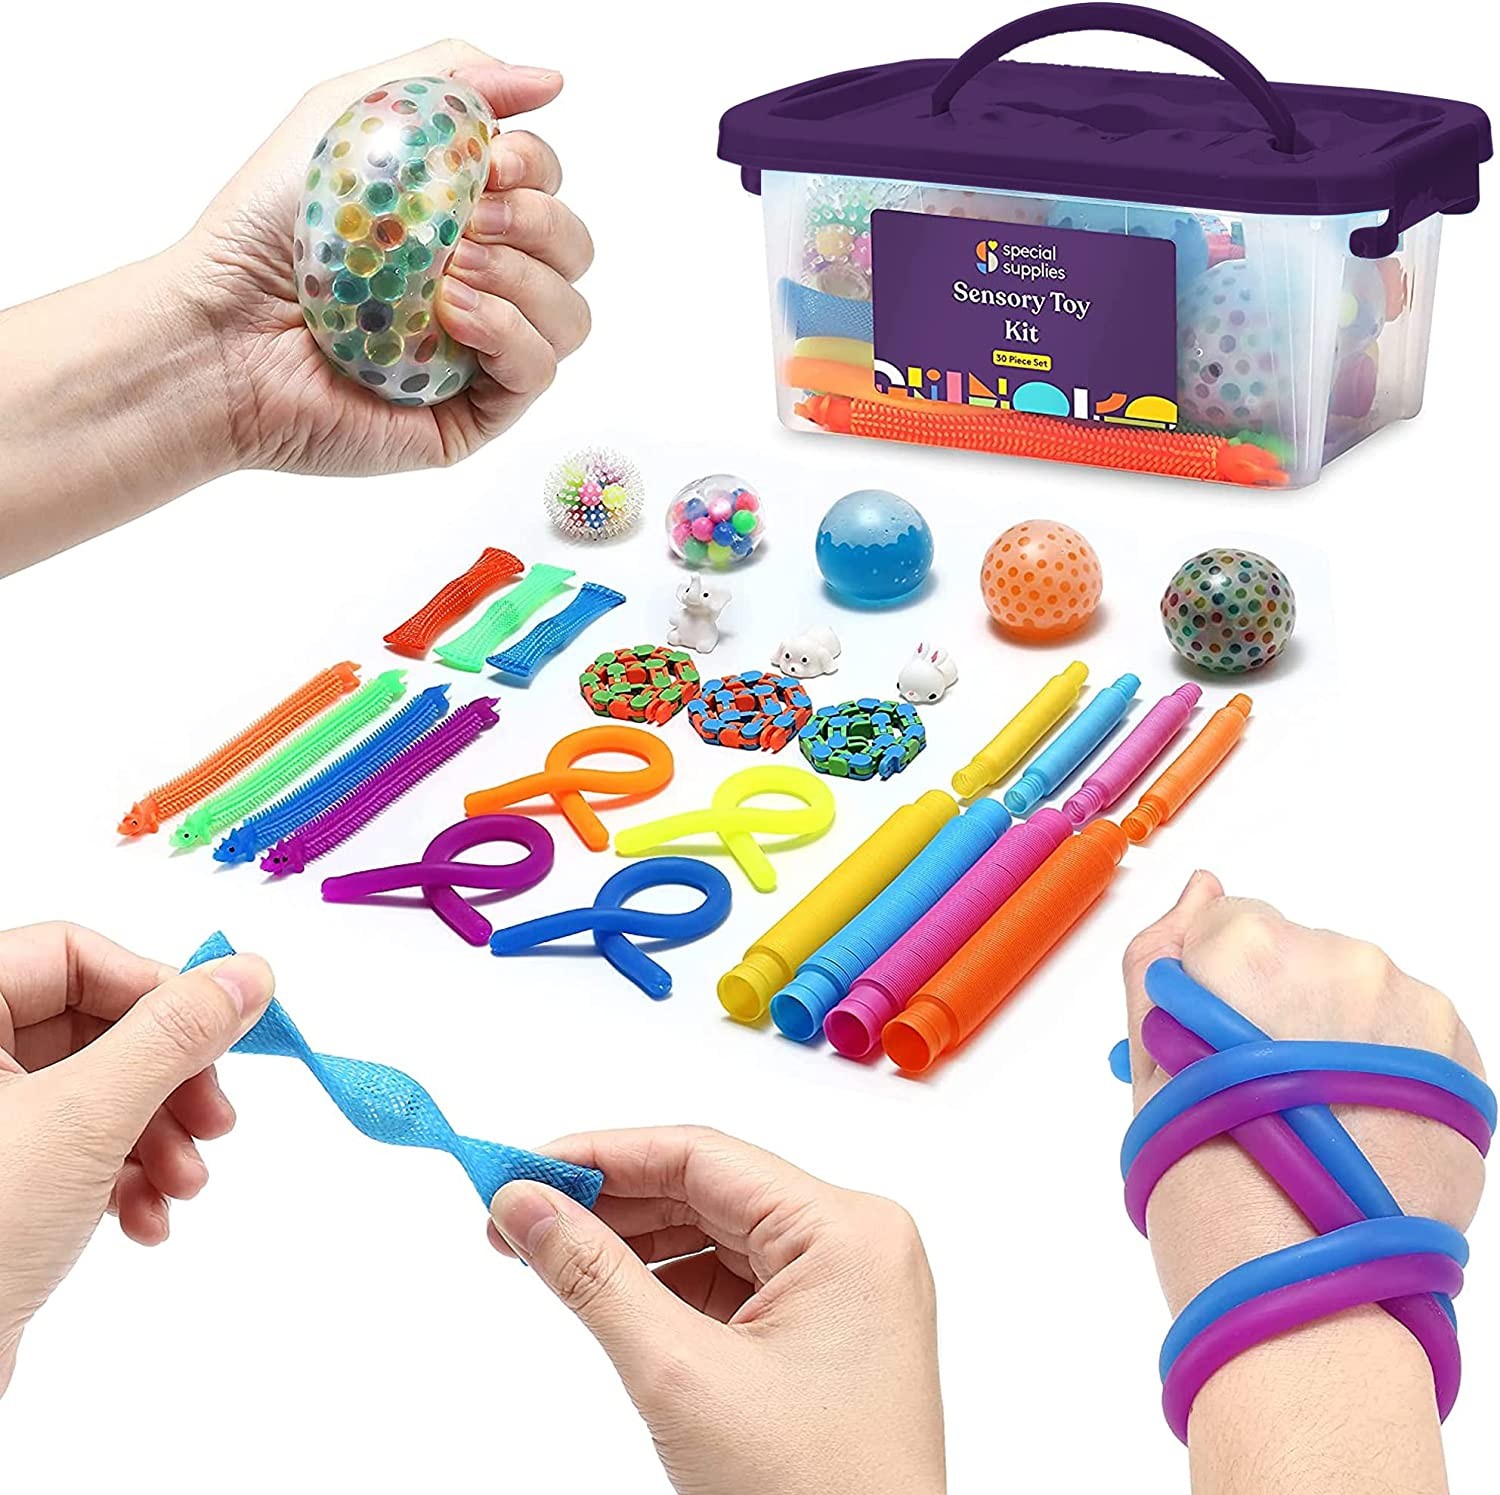 Special Supplies Fidget Toy Pack for Kids, 30 Pc. Set, Interactive Sensory Toys with Squishy Balls, Fun Tubes, Squeeze Pets, and Animal Stretchy Strings Fidgeting, ADHD, and Autism